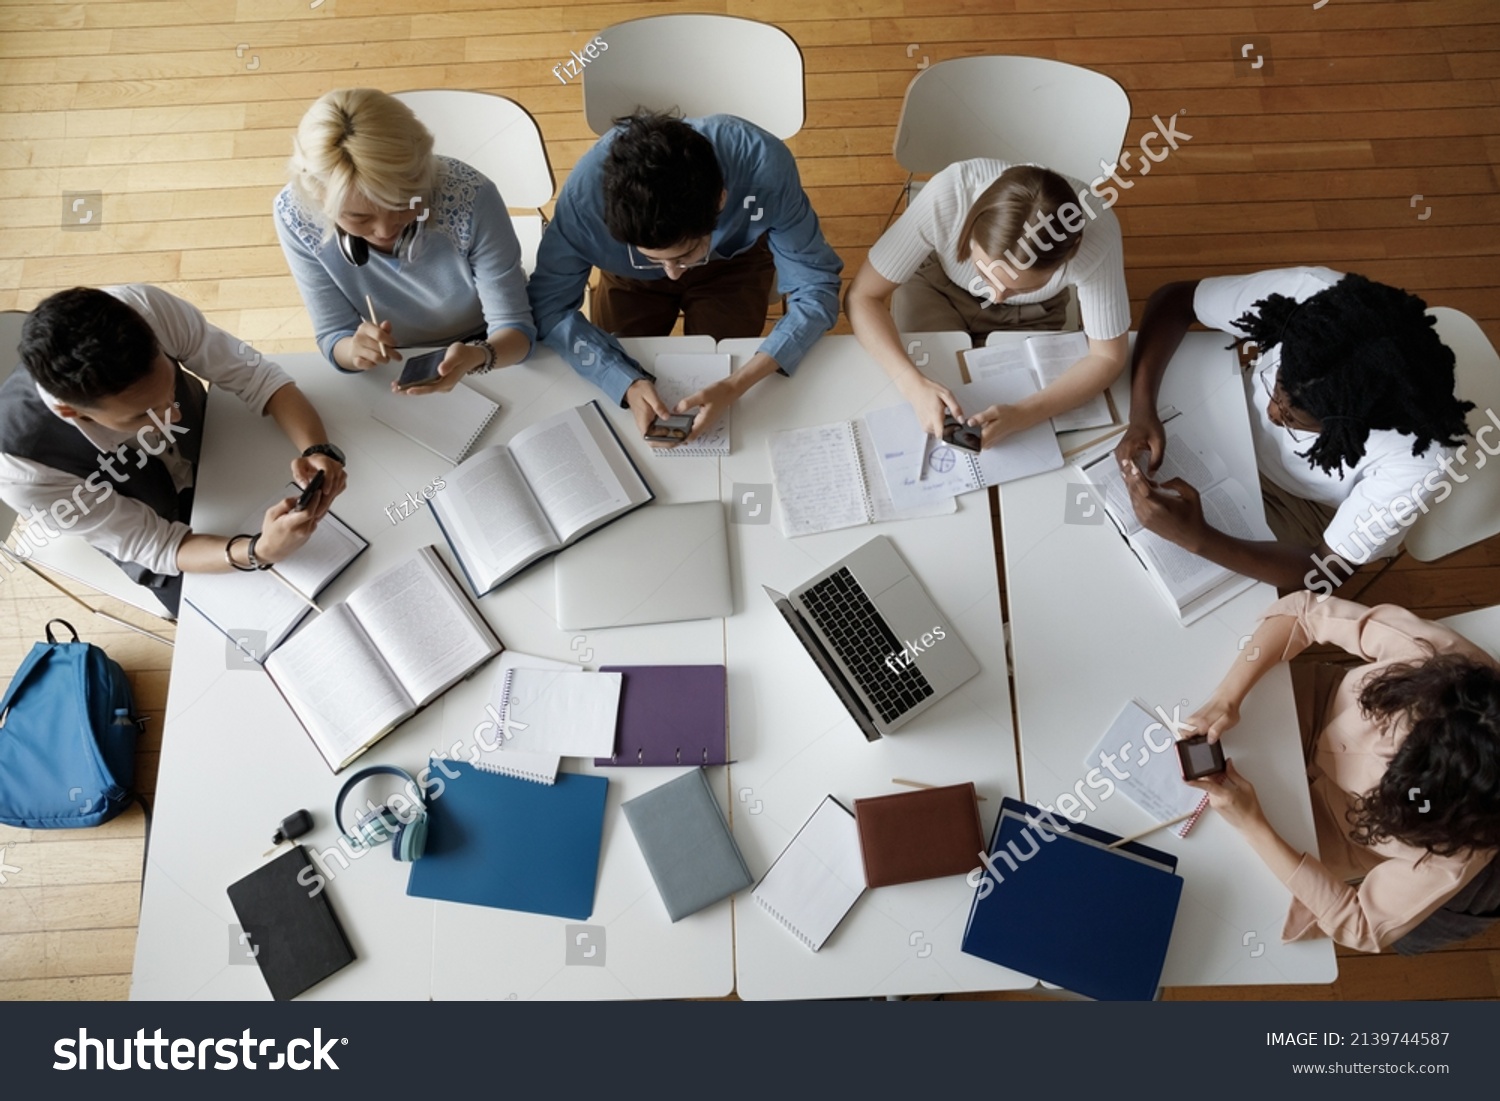 Overhead view group of multi ethnic students use smartphones sit at shared table in classroom. Mobile application usage at break, young gen Z modern wireless tech overuse, bad habit, lifestyle concept #2139744587